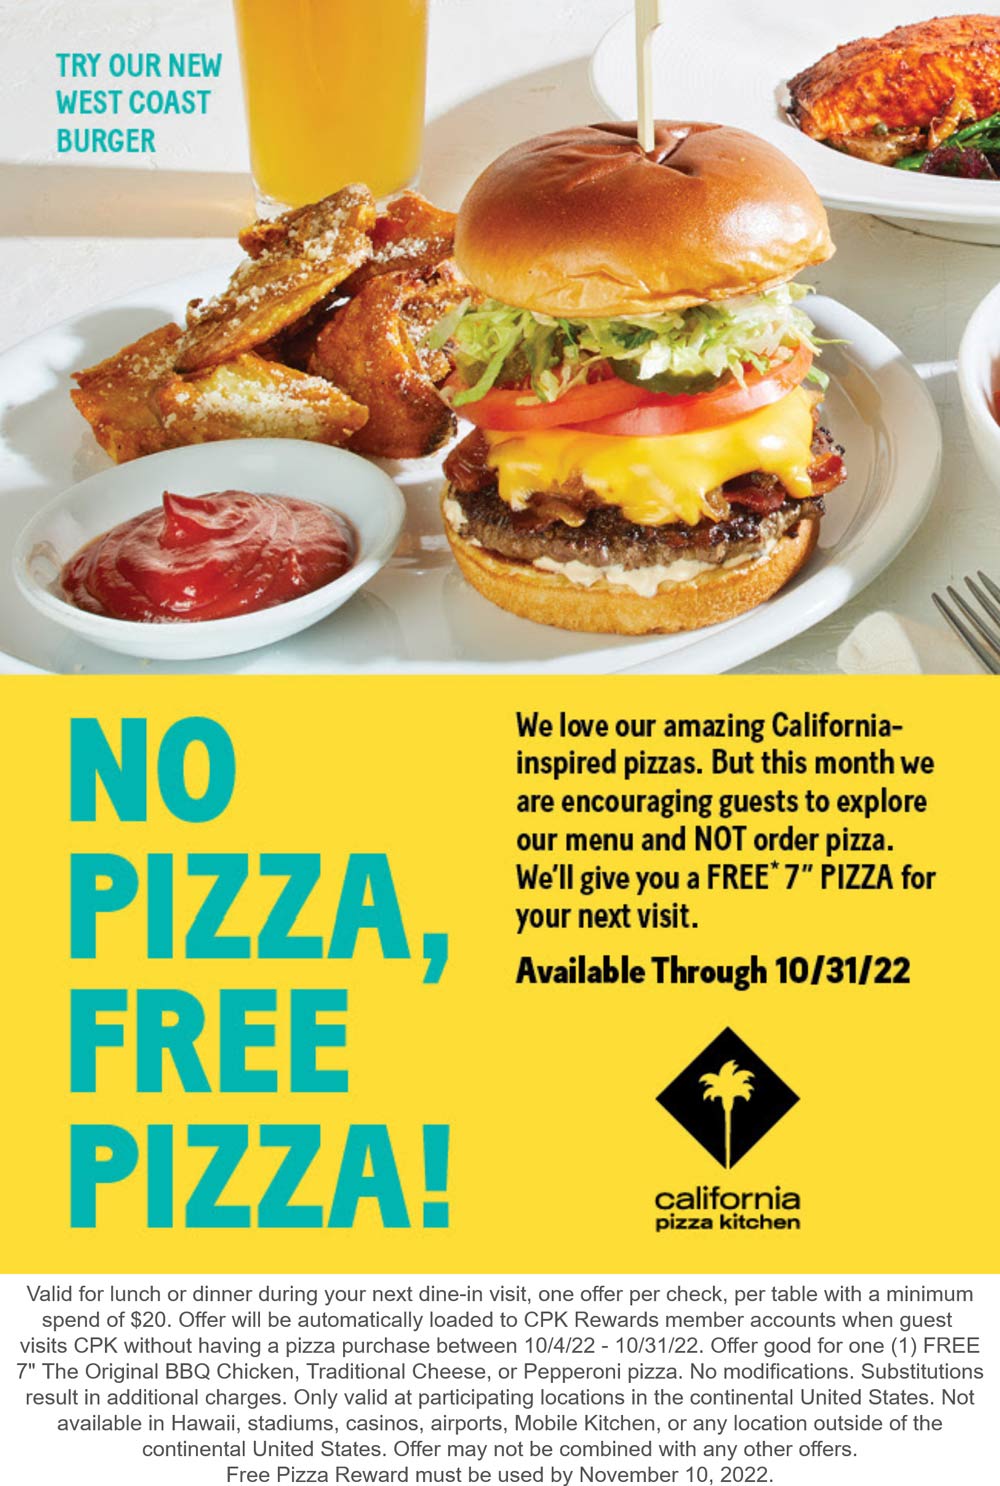 California Pizza Kitchen restaurants Coupon  Free follow-up pizza on $20 spent without a pizza at California Pizza Kitchen #californiapizzakitchen 